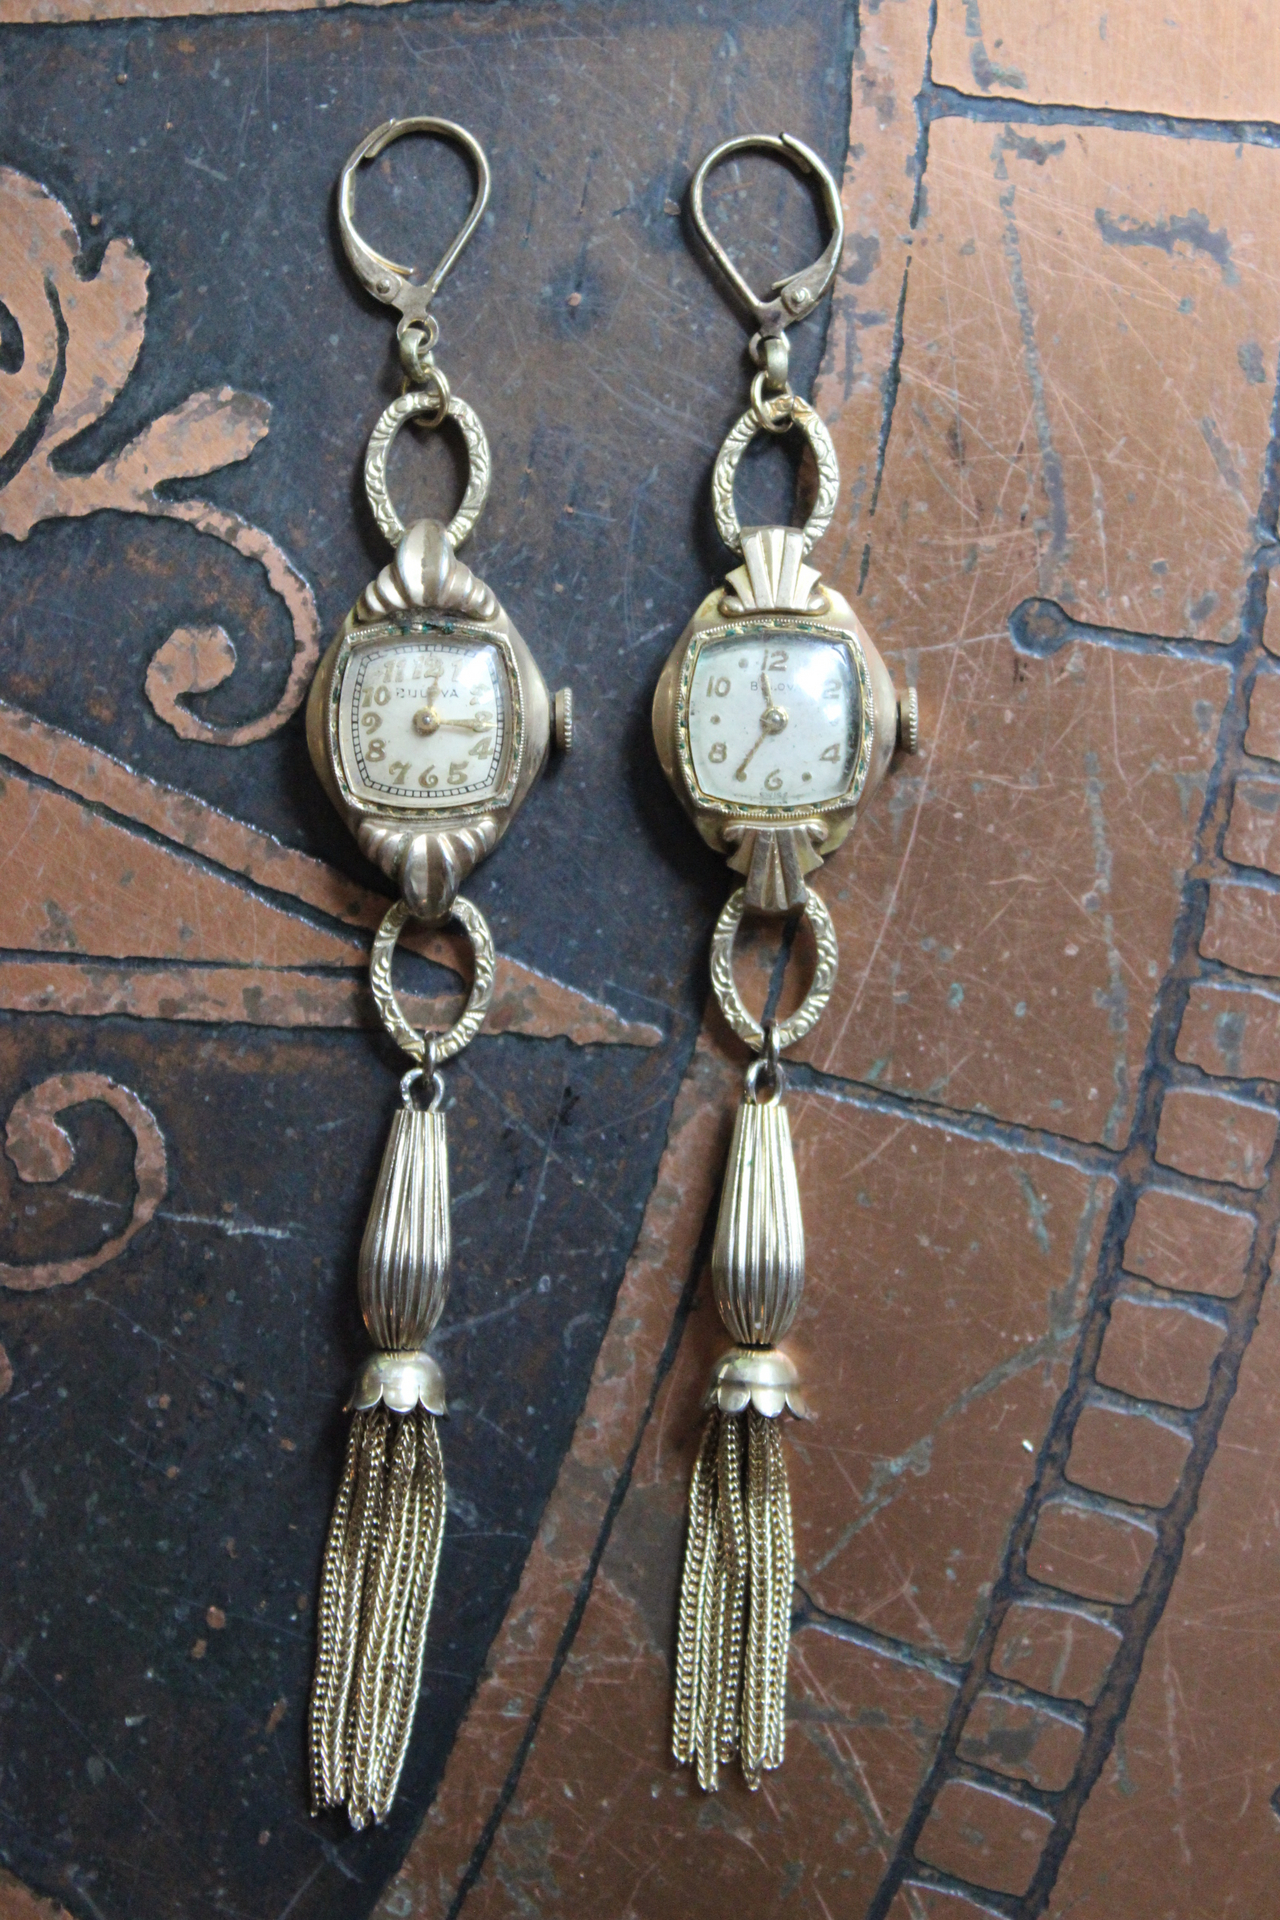 Now is the Time Necklace & Earring Set with 15 Antique & Vintage Watches, Antique Foxtail Chain Tassels & Leverback Earring Wires